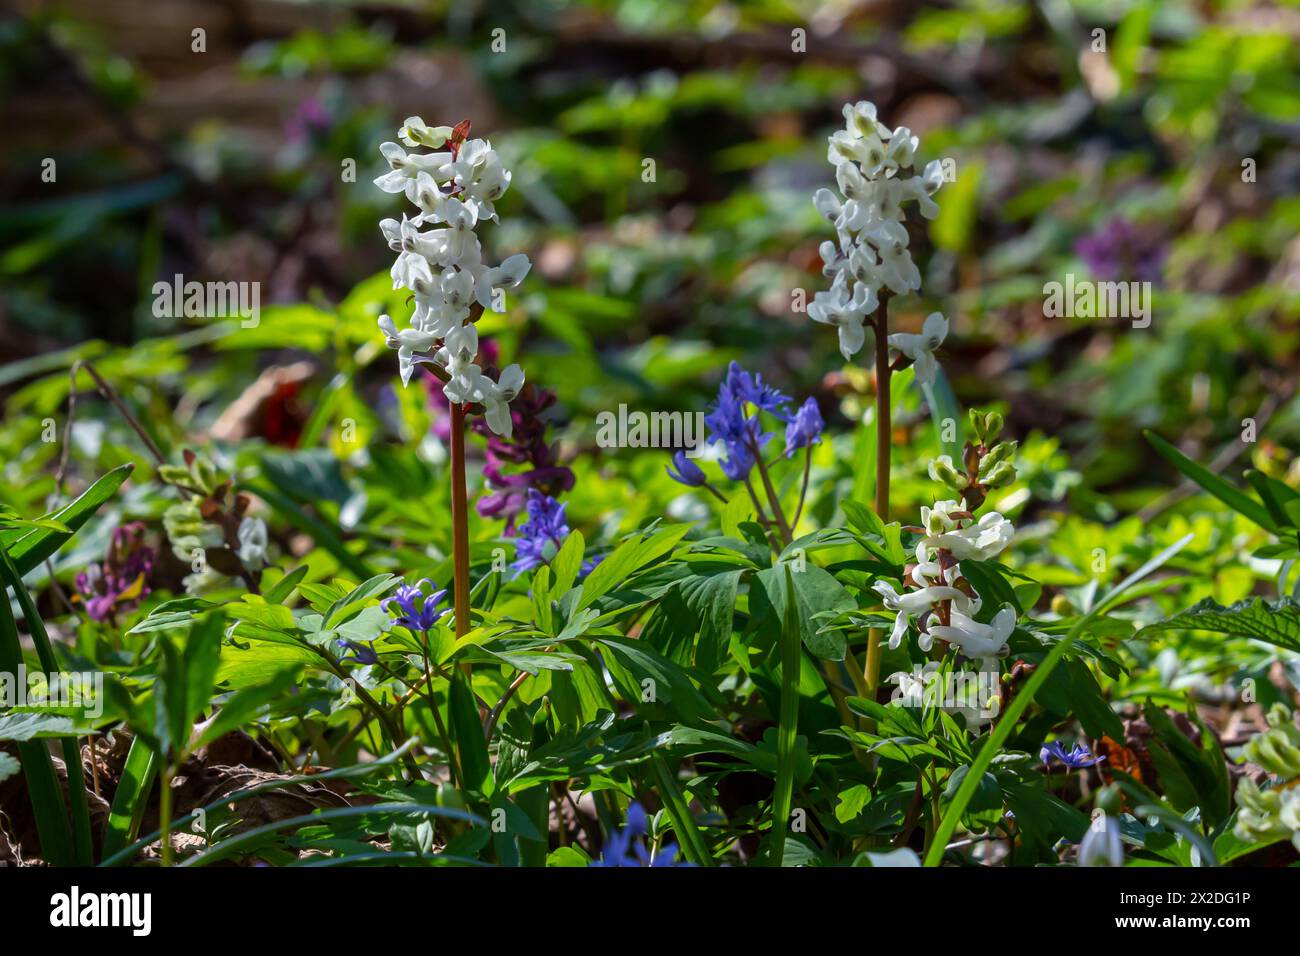 Corydalis blooms in spring in the wild in the forest. Stock Photo